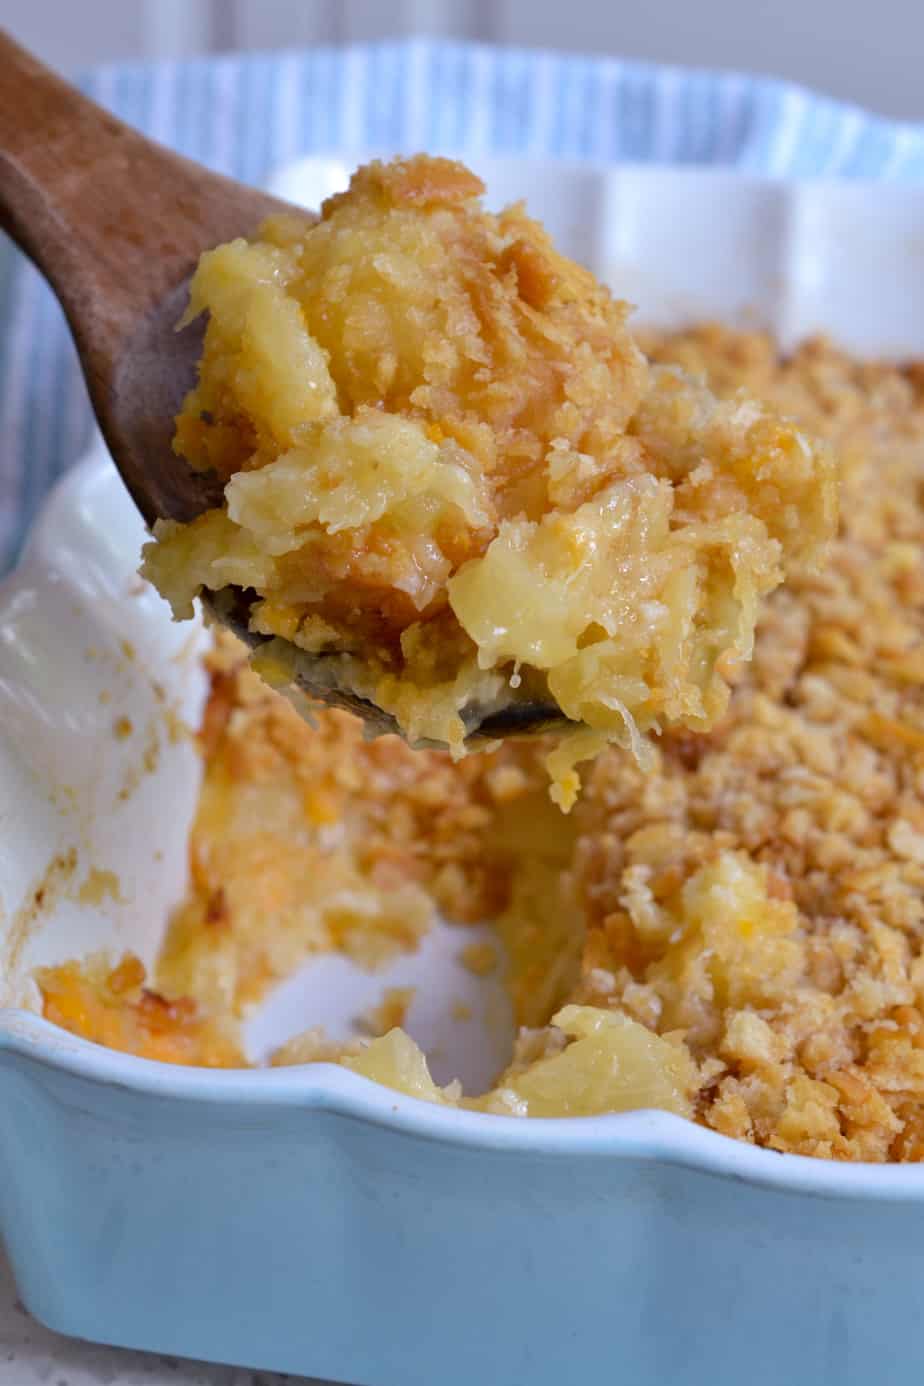 A spoonful of cheesy pineapple casserole